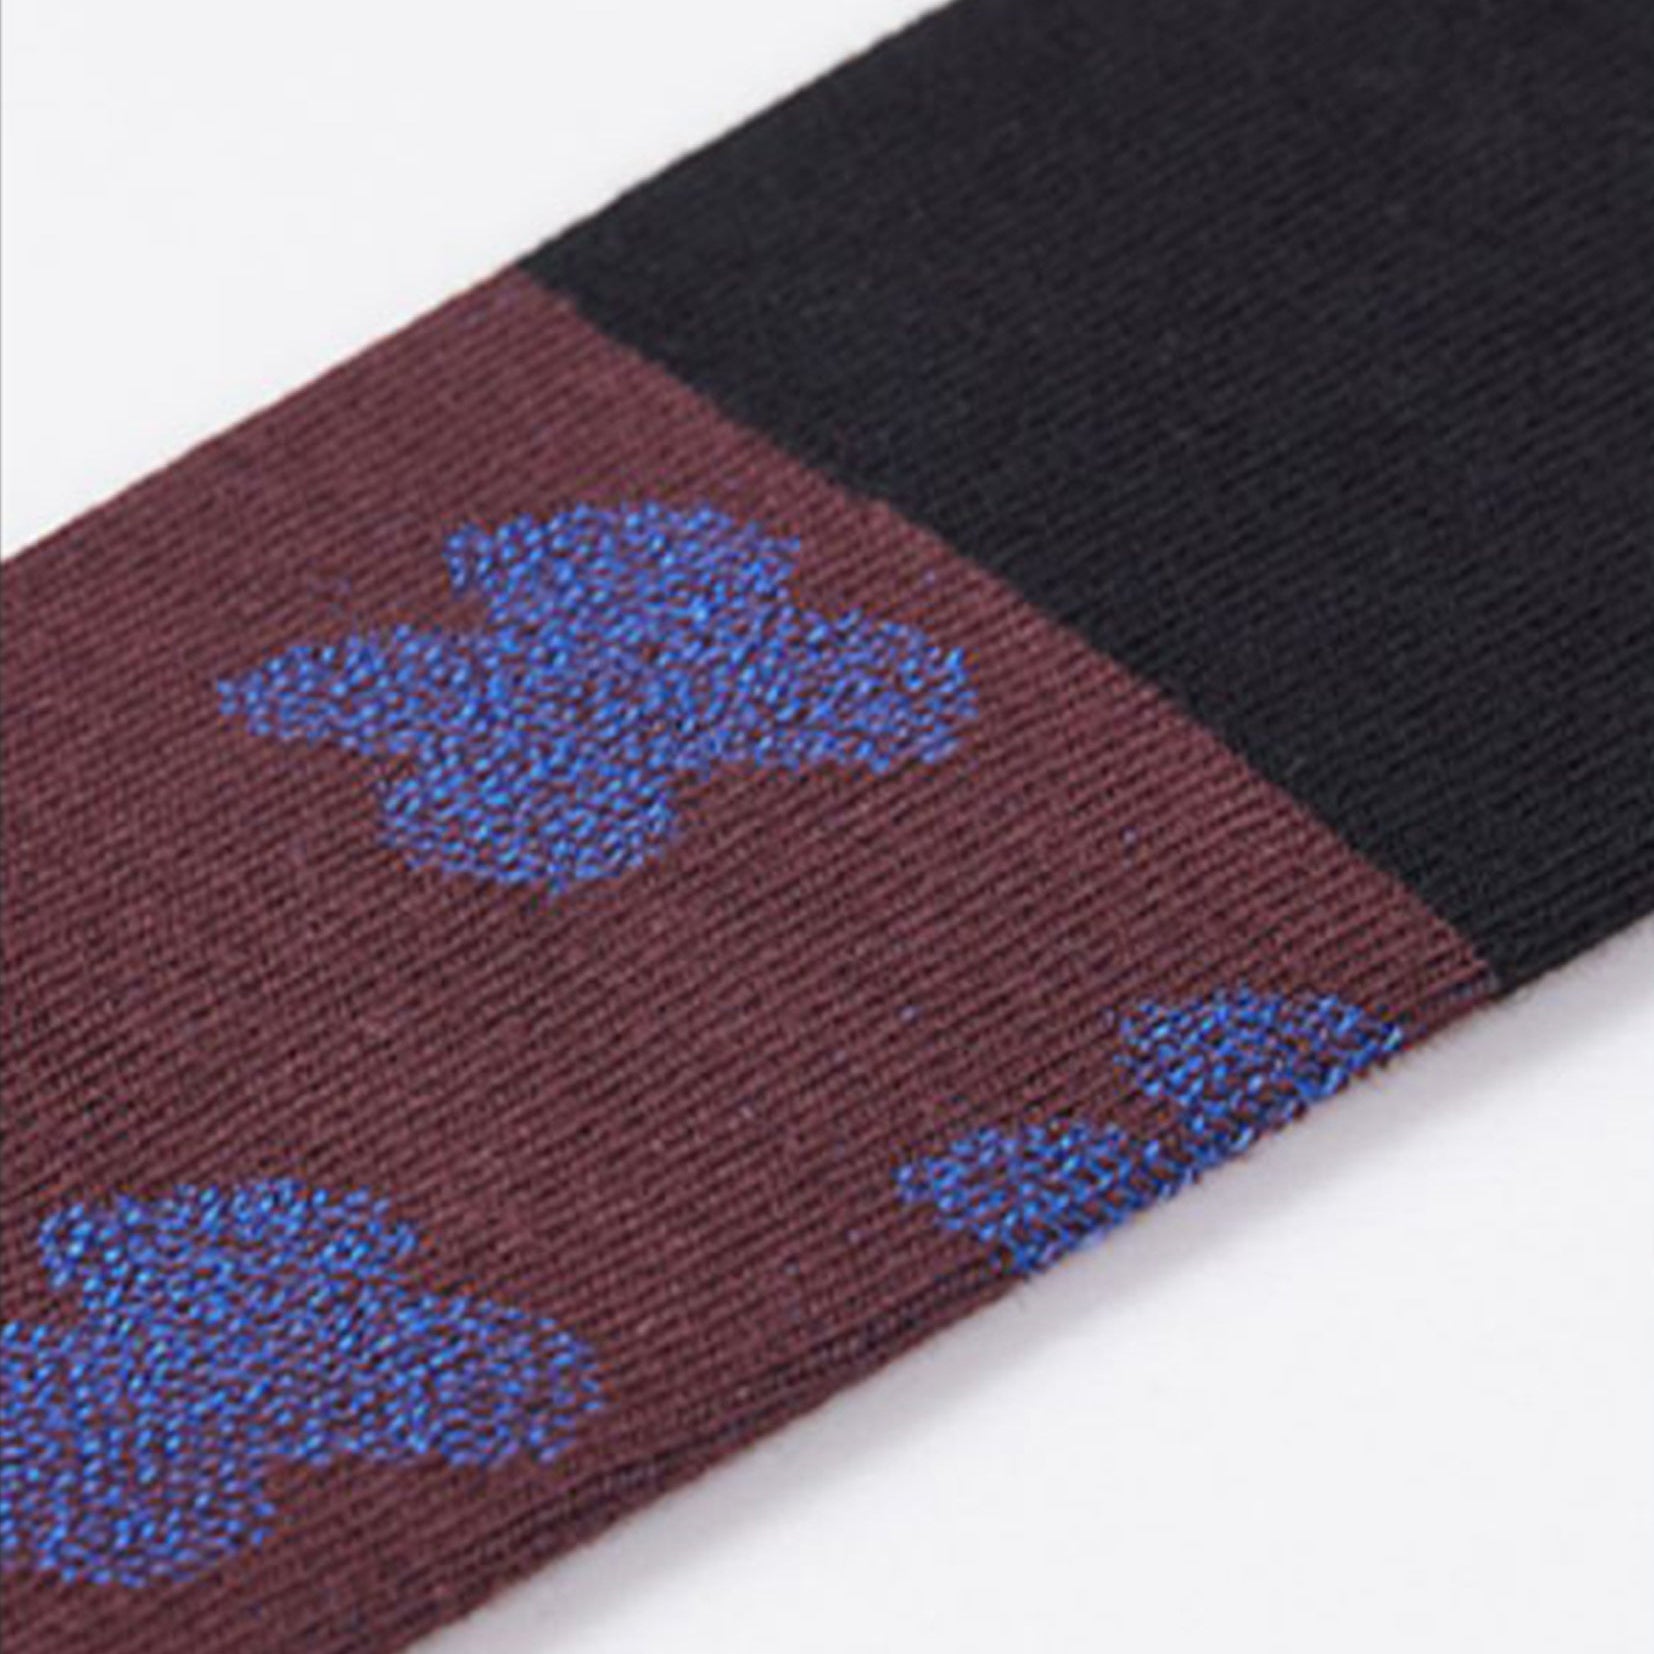 [For adults & kids] Floral splice over-the-calf sock in midnight sky